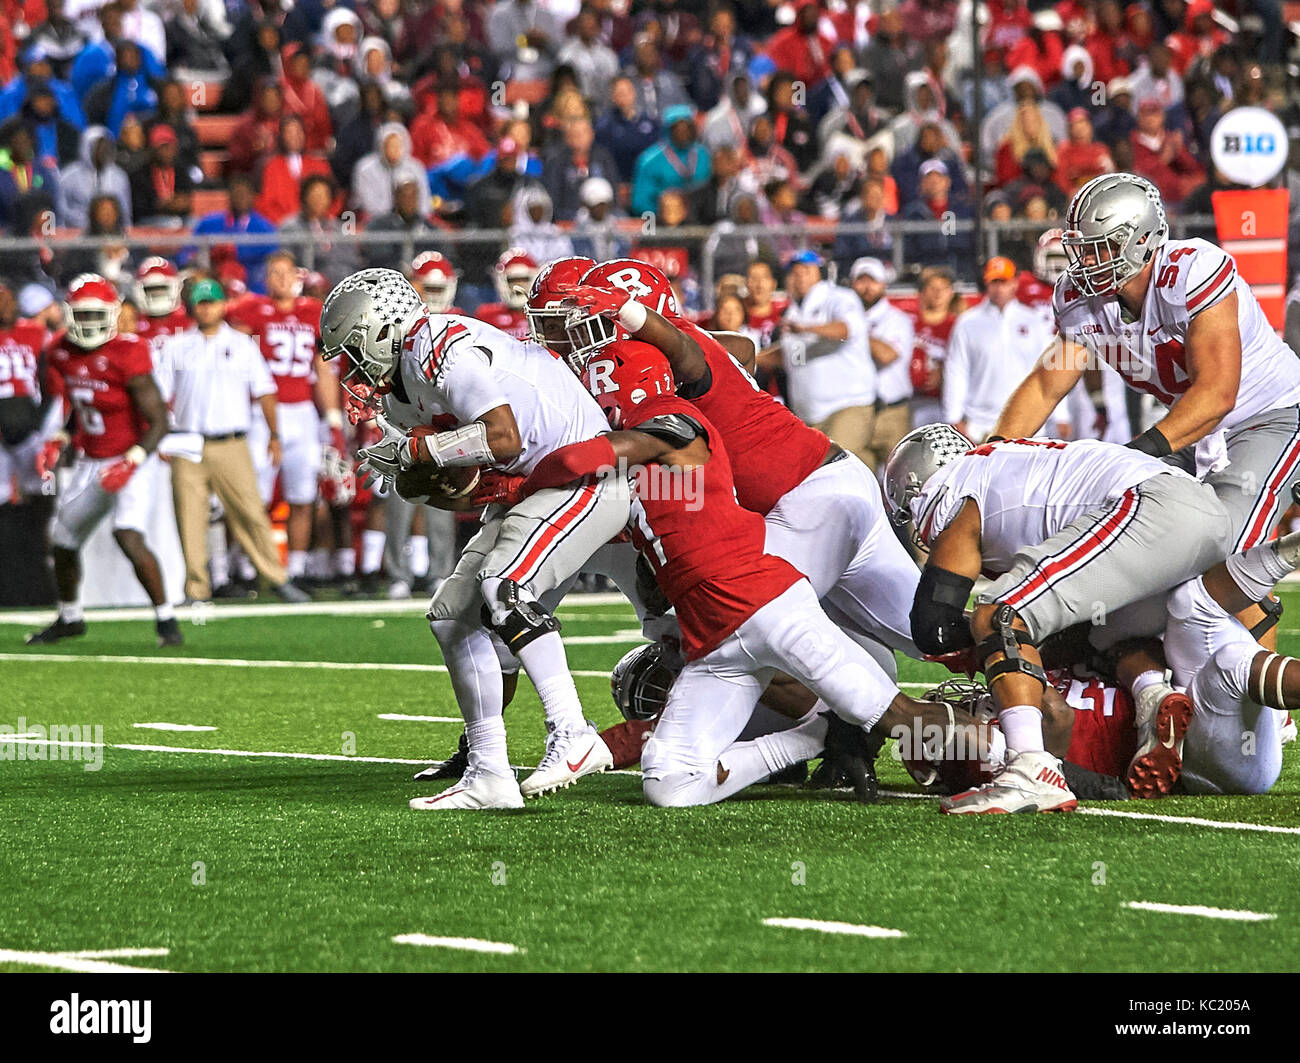 Piscataway, New Jersey, USA. 30th Sep, 2017. Ohio State's quarterback J.T. Barrett (16) is tackled by Rutgers defensive back K.J. Gray (17) play during NCAA football action between the Ohio State Buckeyes and the Rutgers Scarlet Knights at High Point Solution Stadium in Piscataway, New Jersey. Duncan Williams/CSM/Alamy Live News Stock Photo